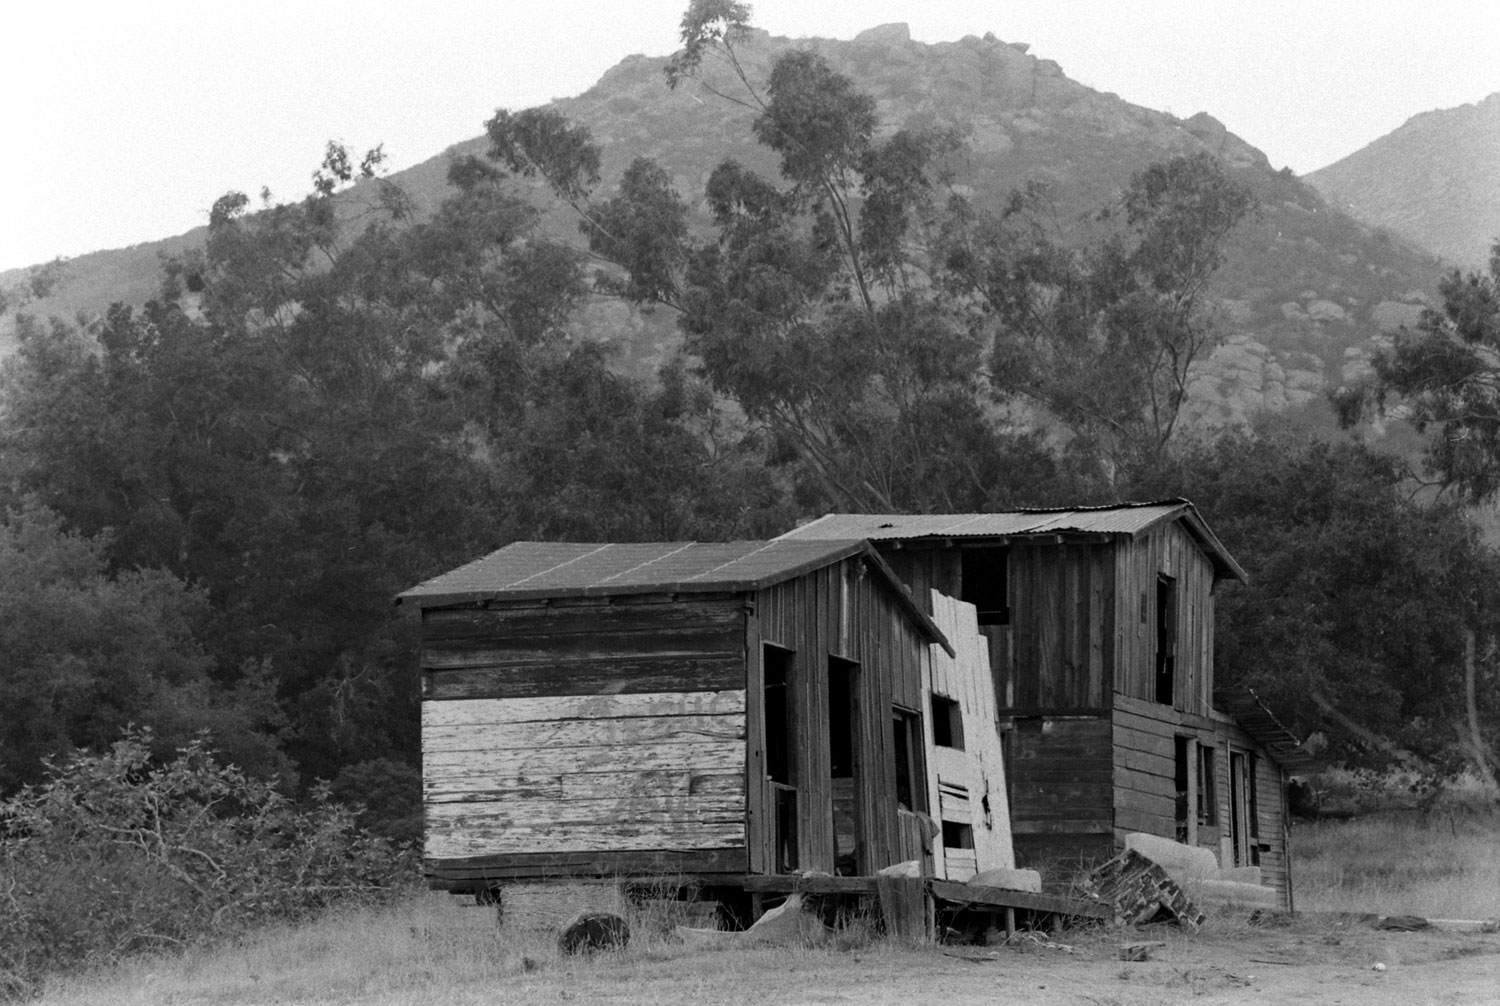 Spahn Ranch, one-time home of the Manson Family, 1969.